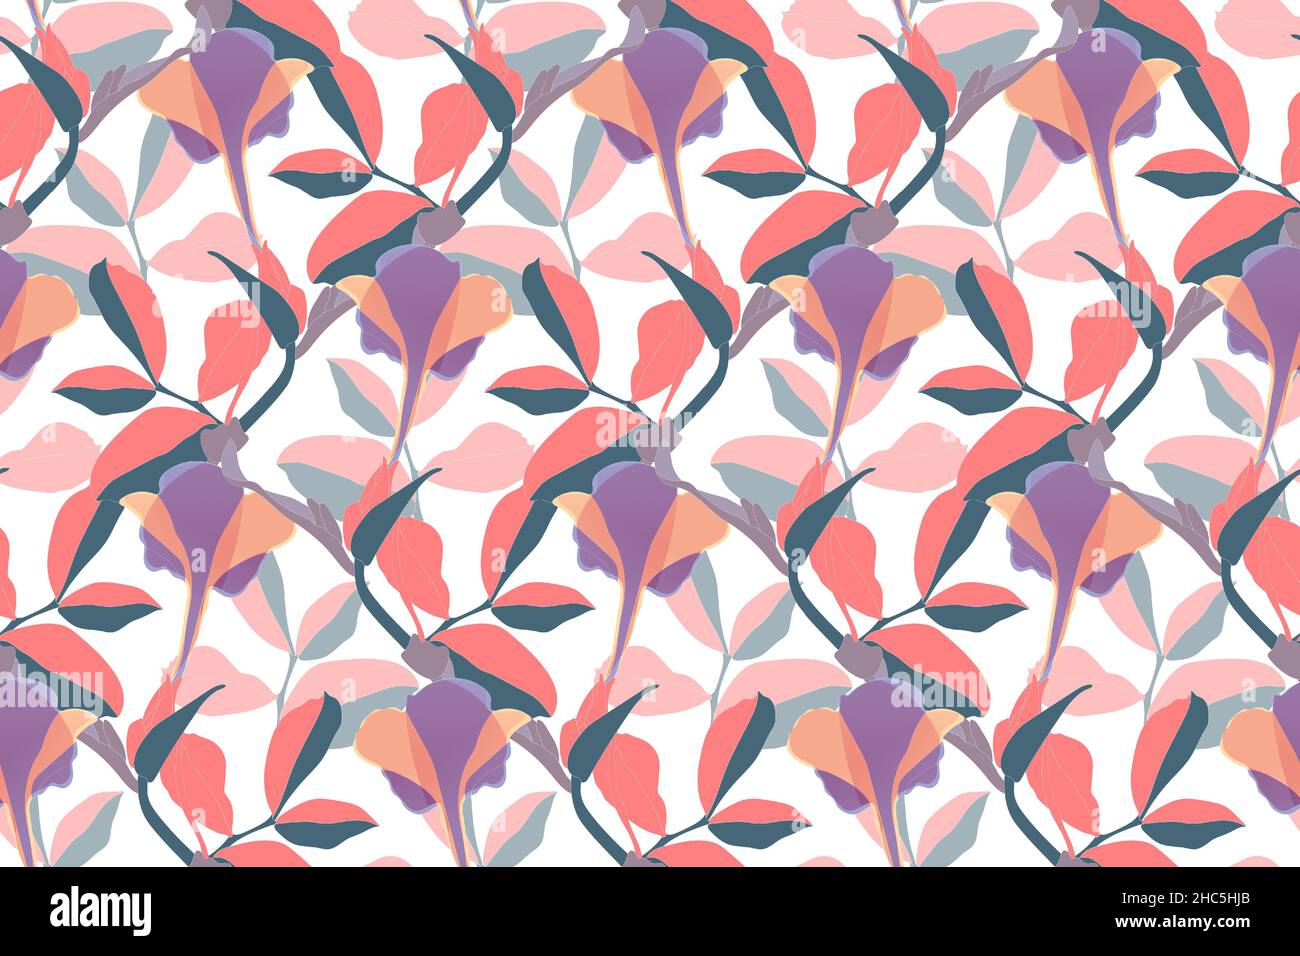 Art floral vector seamless pattern. Coral cleaves. Stock Vector